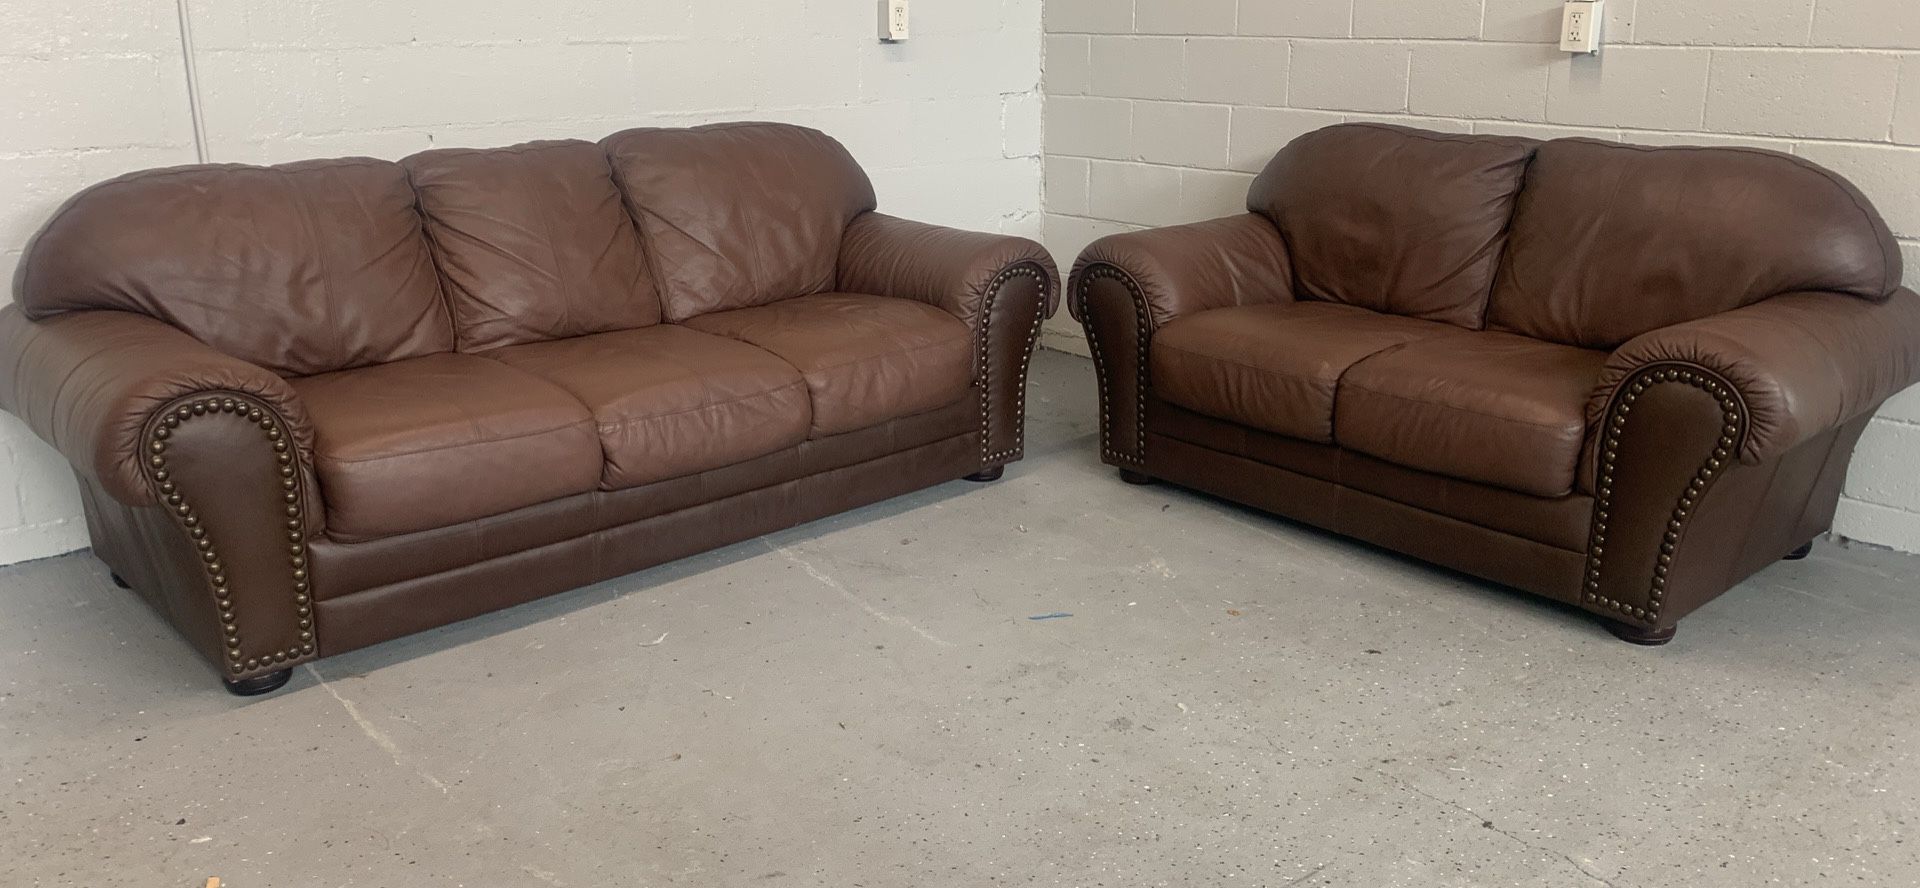 2 Piece Sofa / Couch / Loveseat Genuine Leather In Brown W/ Nail head Trim